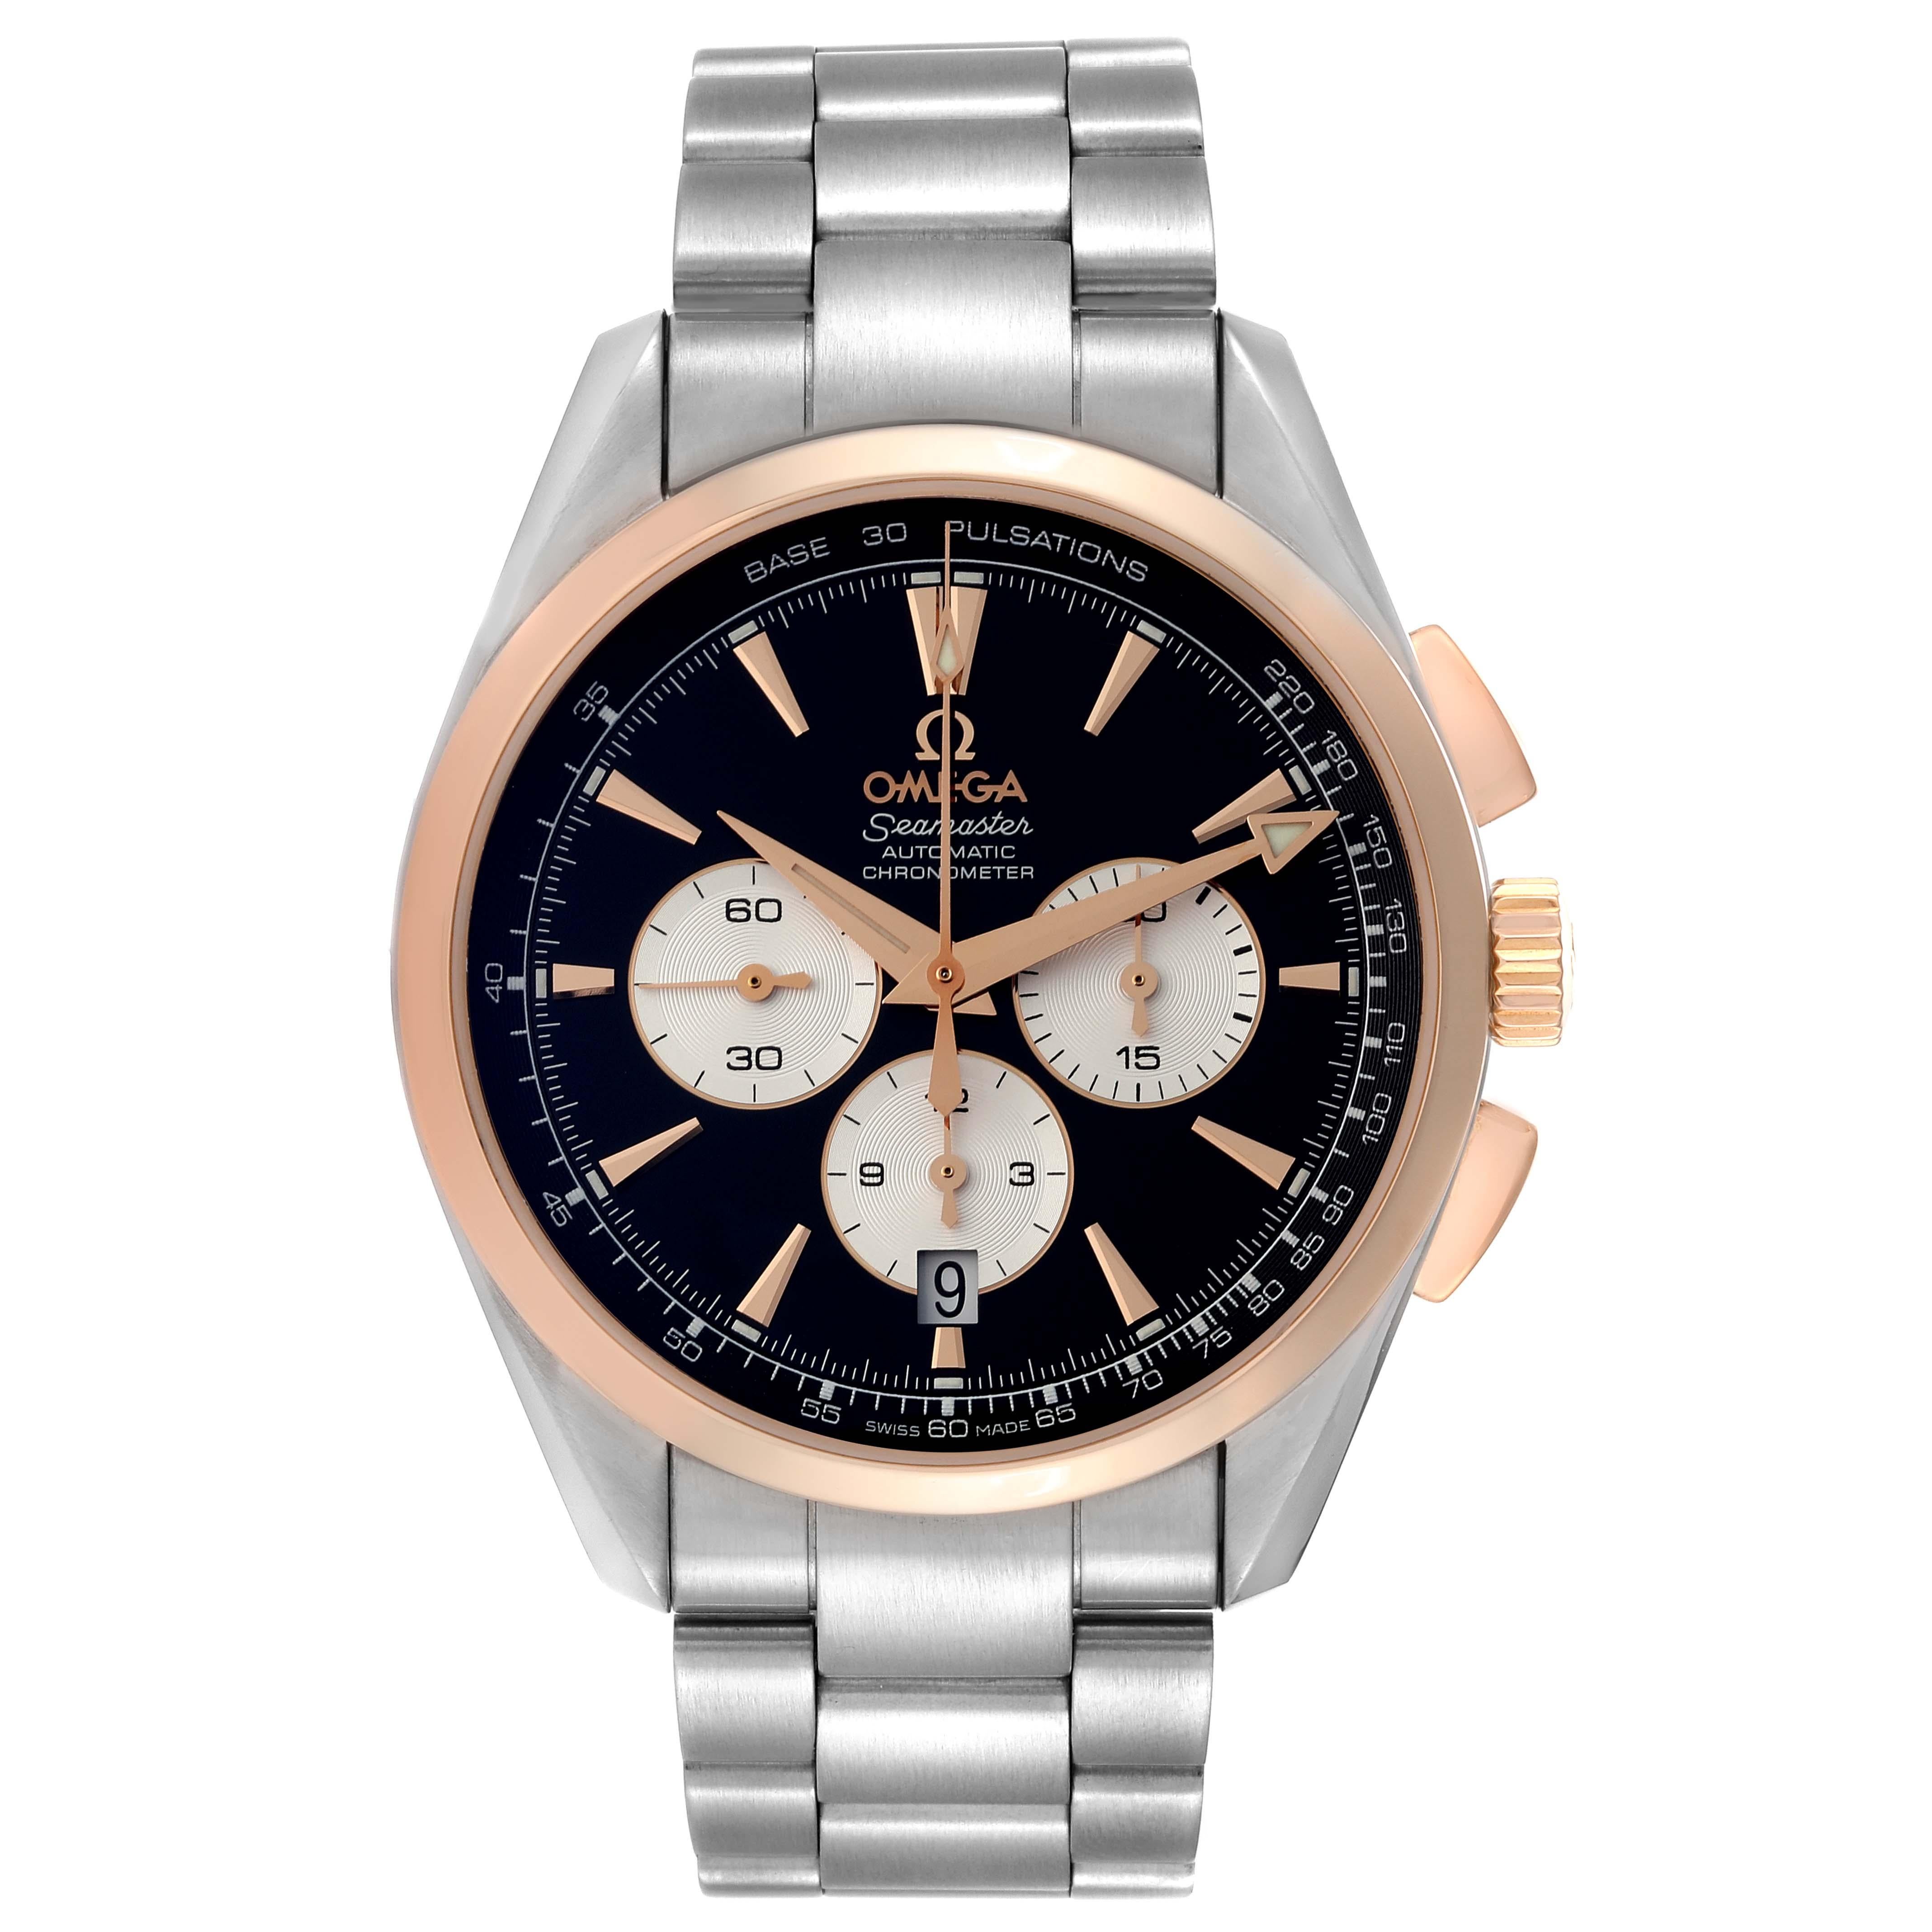 Omega Seamaster Steel Rose Gold Mens Watch 221.20.42.40.01.002 Box Card. Automatic self-winding movement with Co-Axial Escapement. Stainless steel and 18K rose gold round case 42 mm in diameter. Omega logo on 18k rose gold crown. 18K rose gold